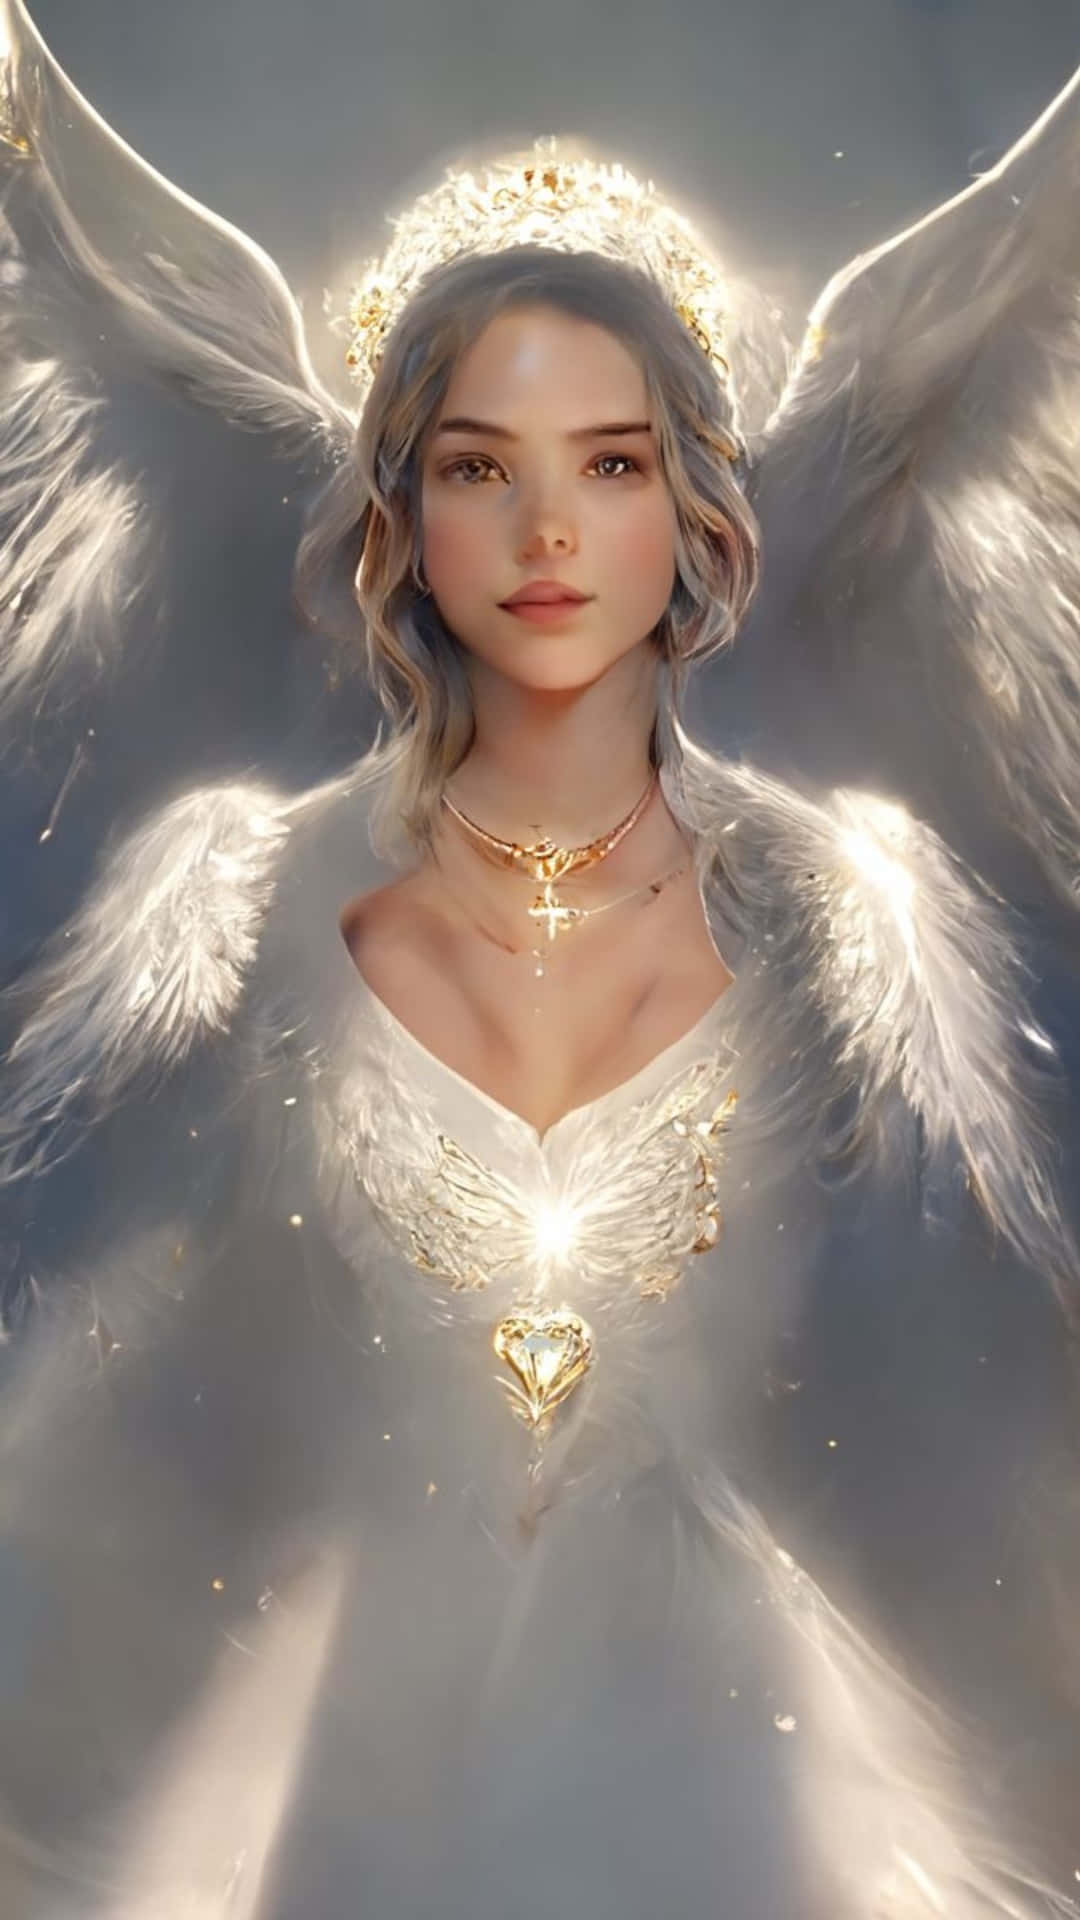 A Serene Angelic Figure with Majestic Wings Wallpaper